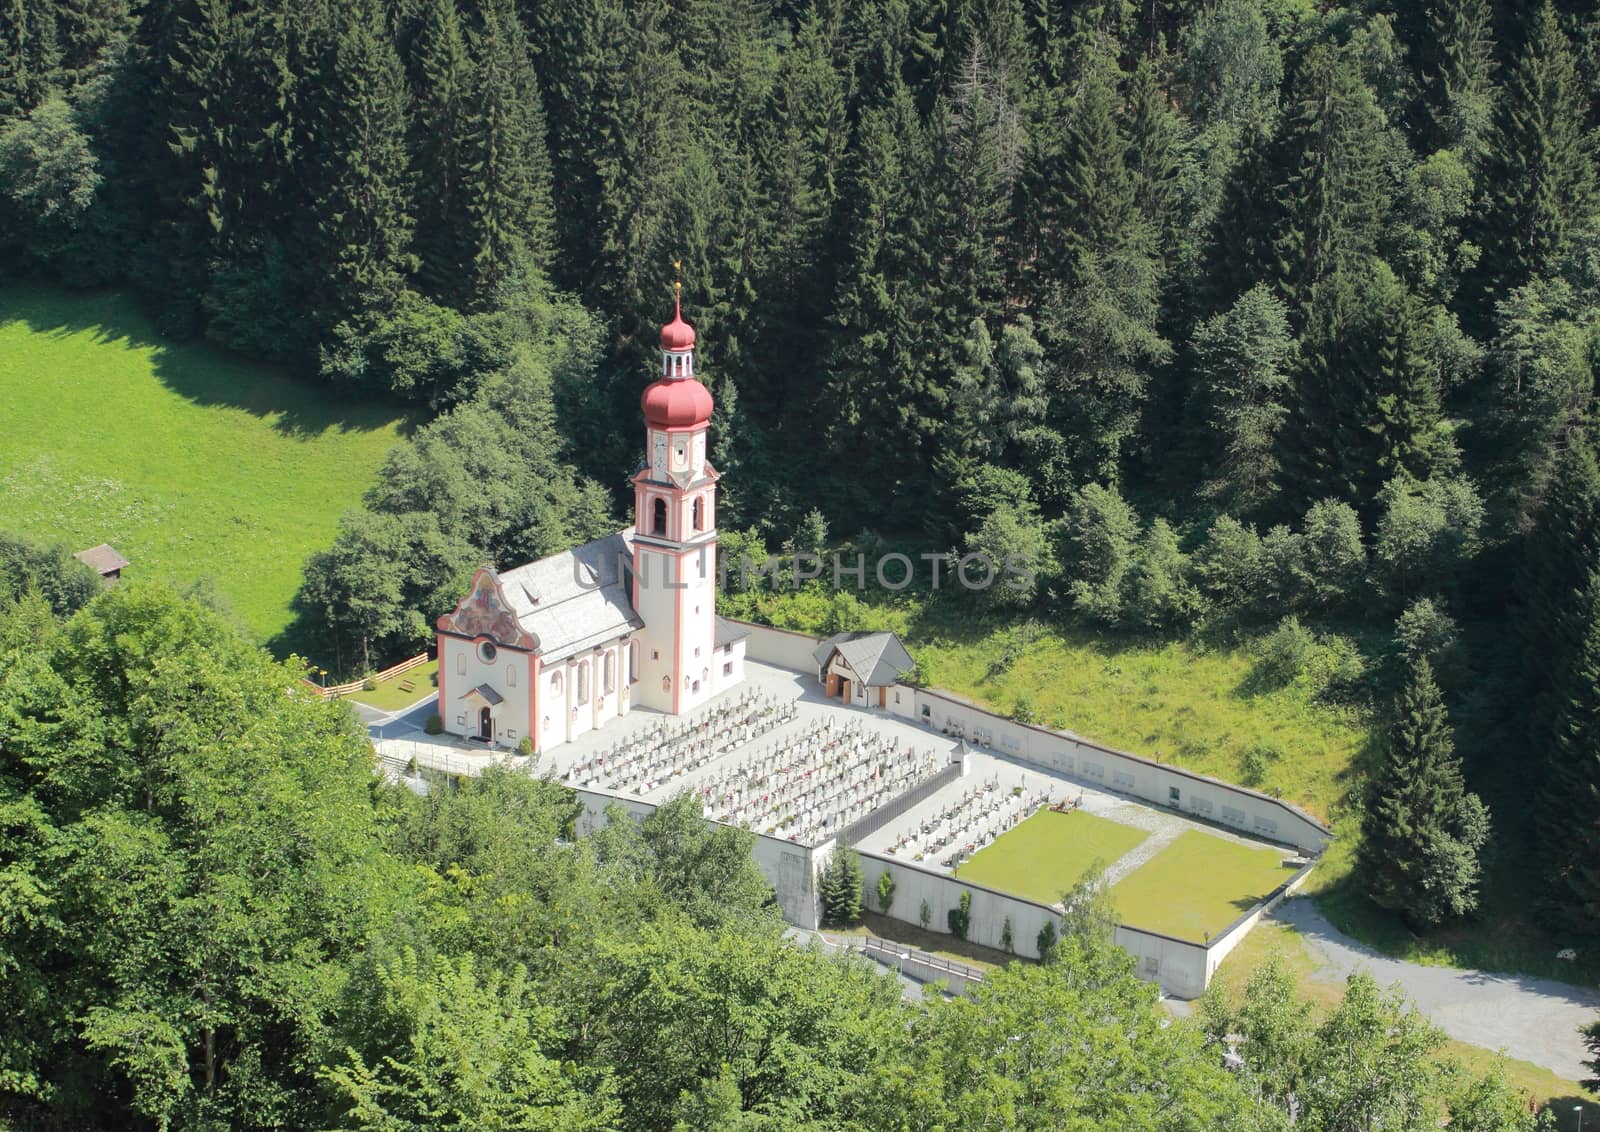 Austrian church and graveyard in the Alps